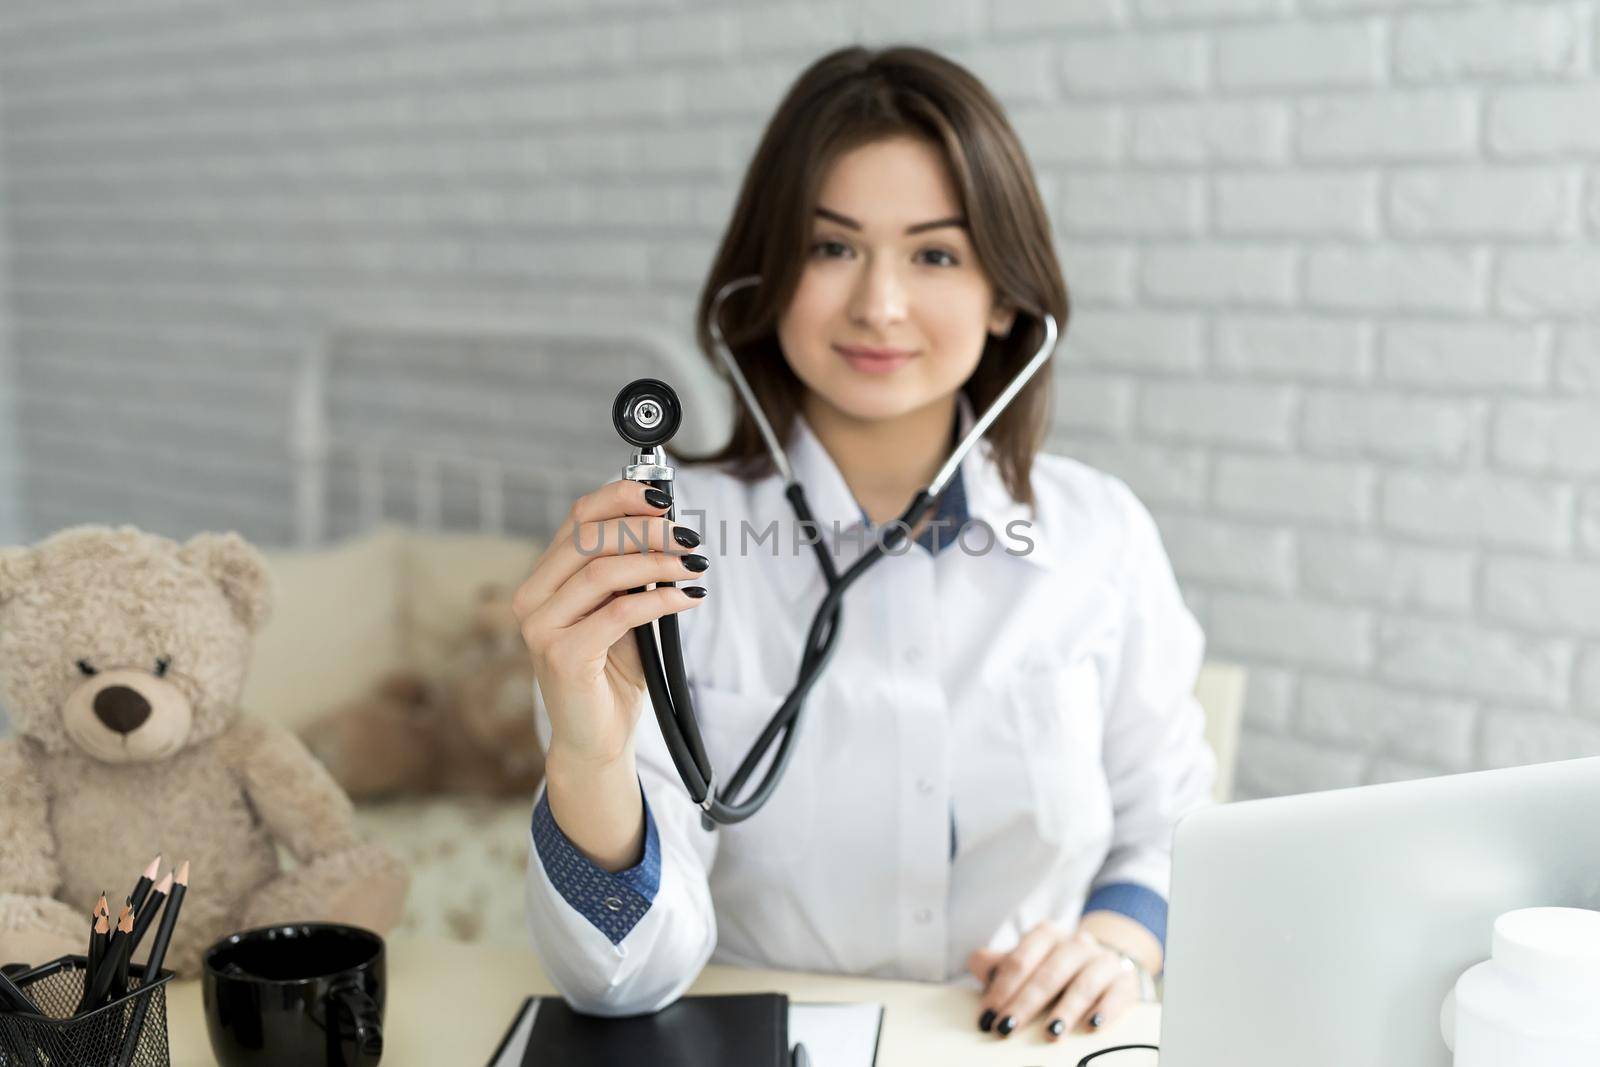 Medical doctor woman holding a stethoscope focus on the stethoscope. by StudioPeace